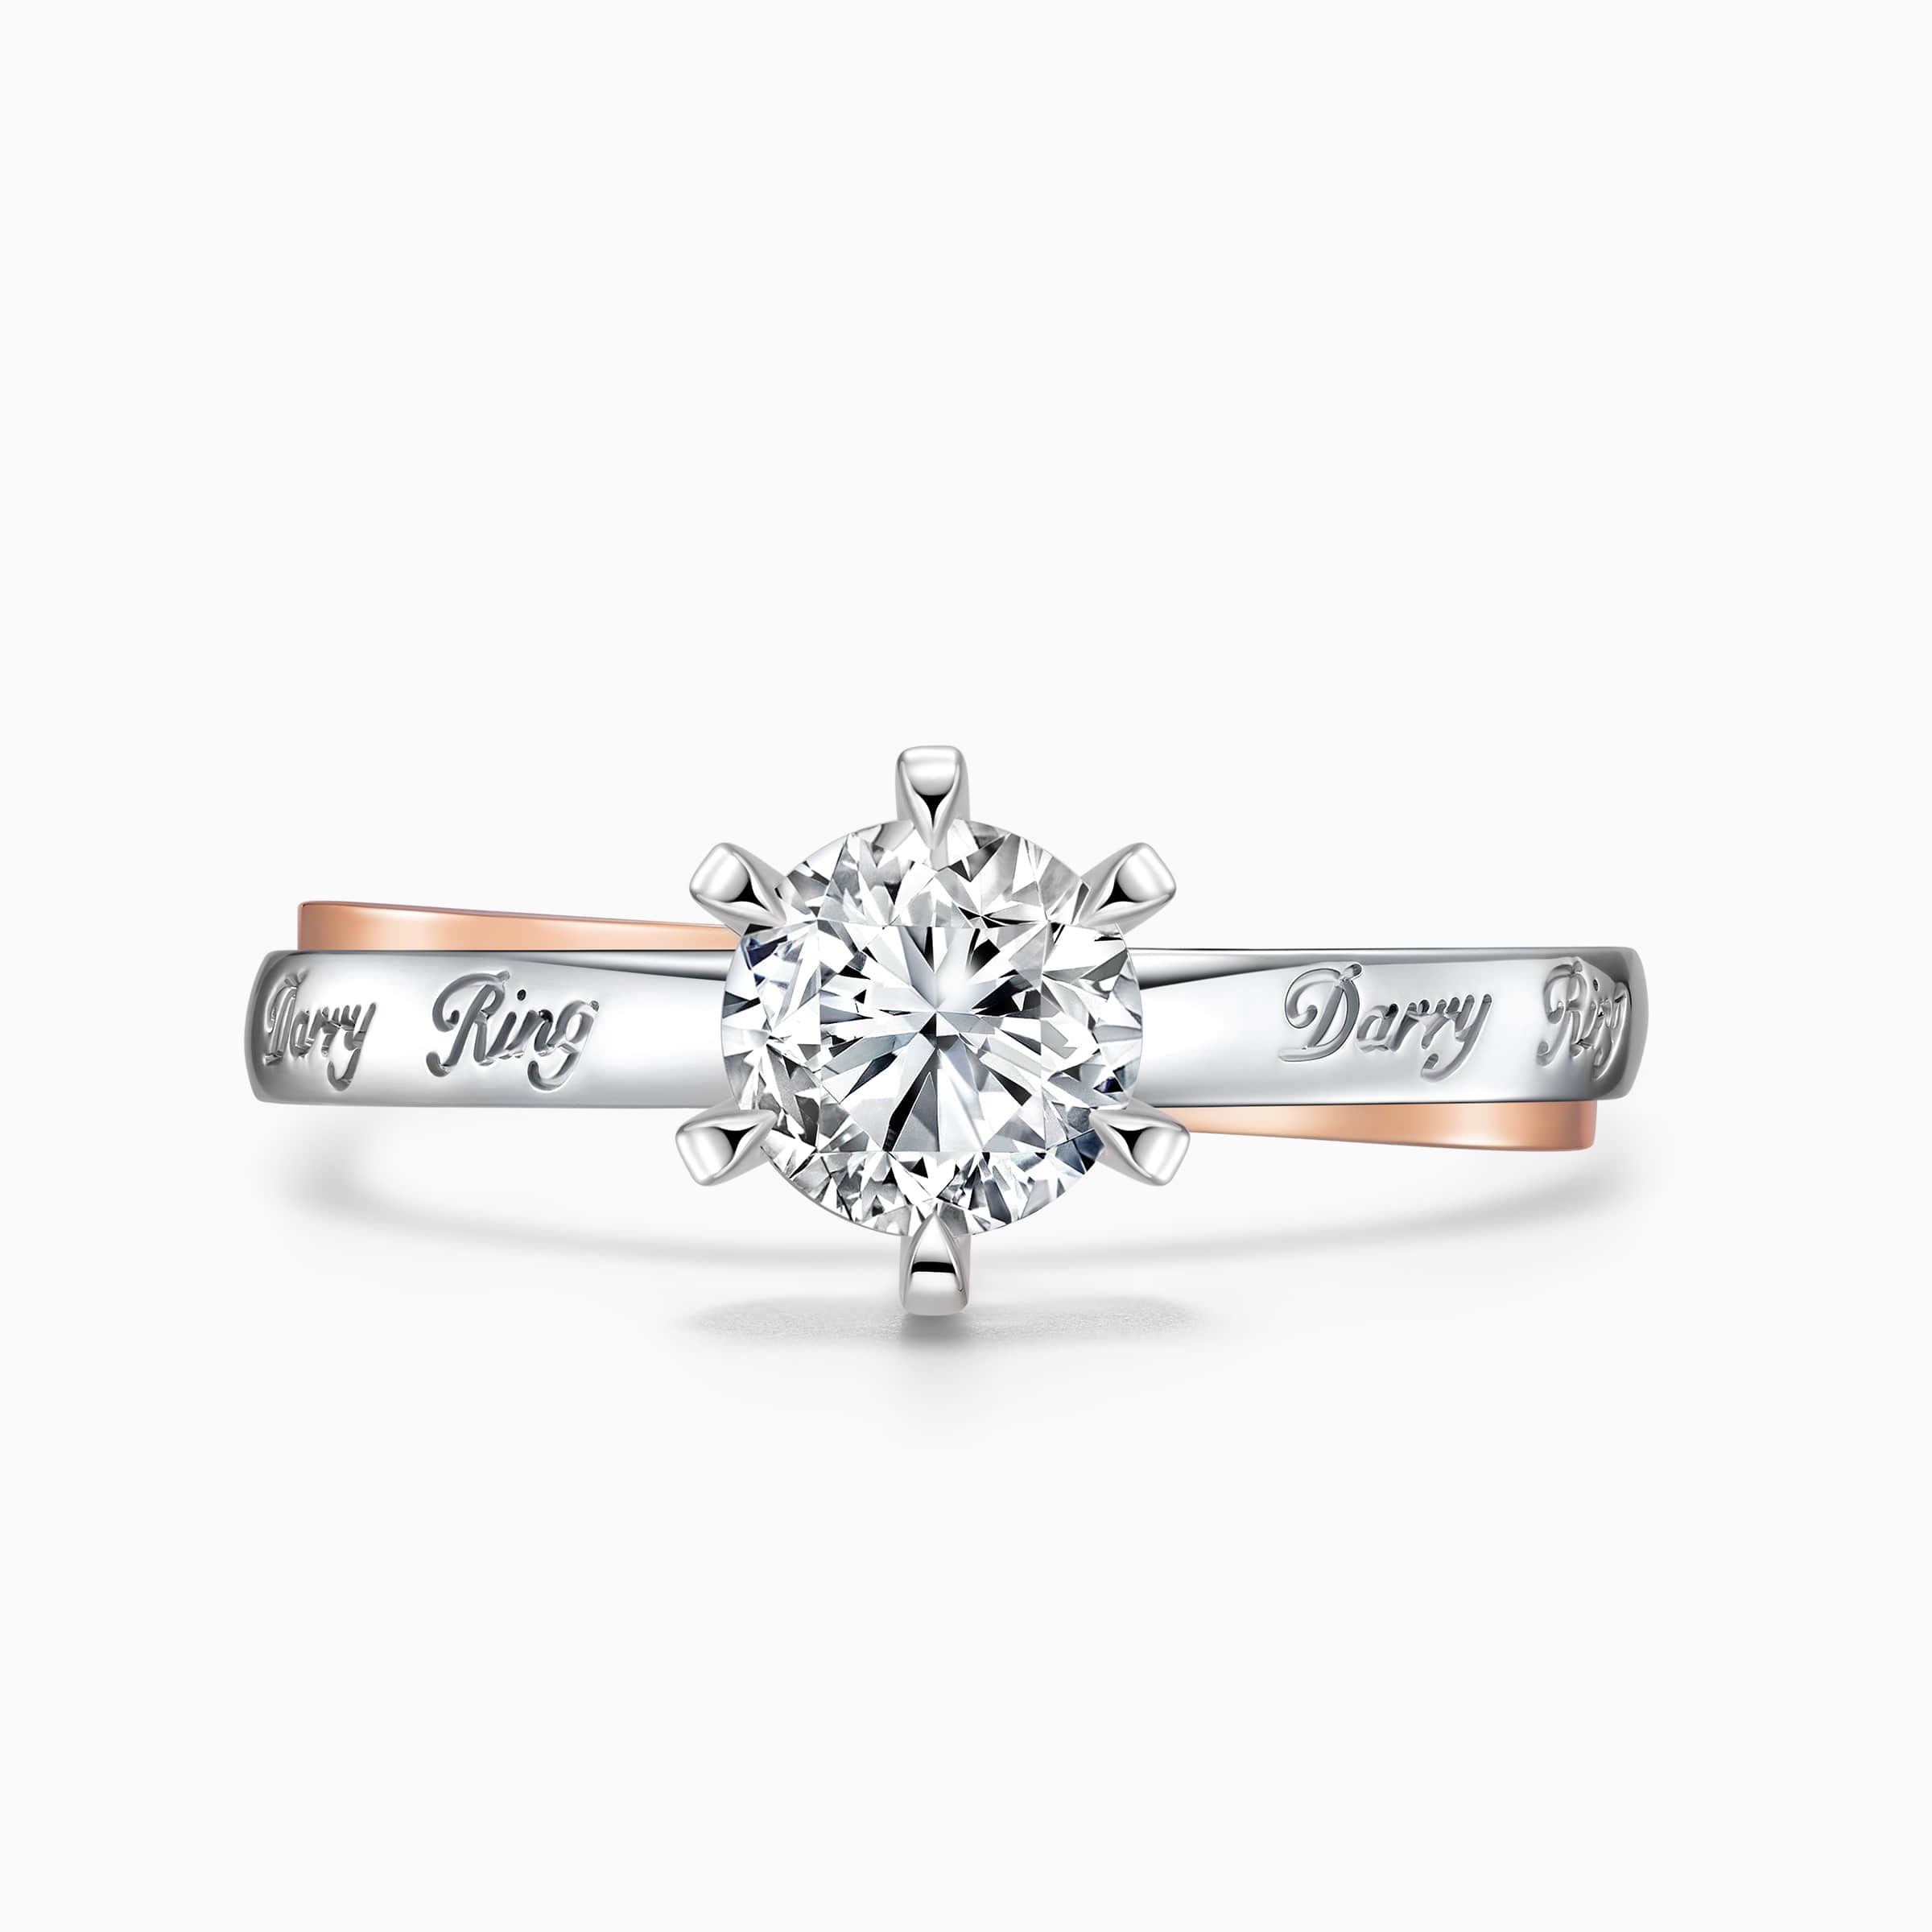 DR Love Mark solitaire engagement ring with Darry Ring logo